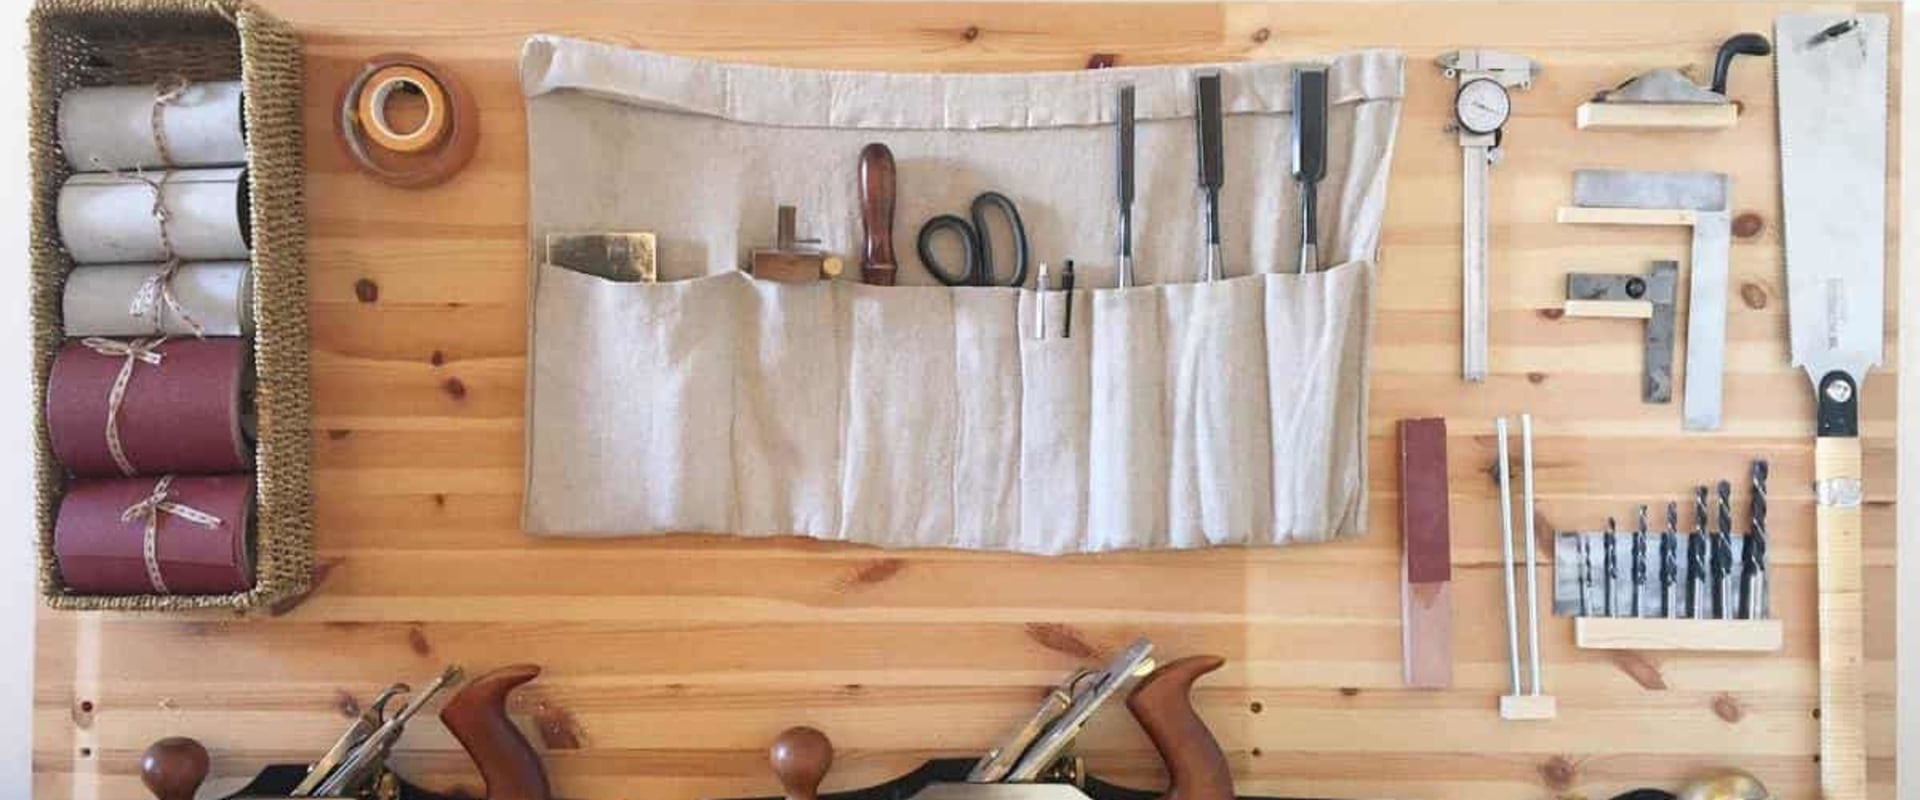 What are the ways to store your hand tools?